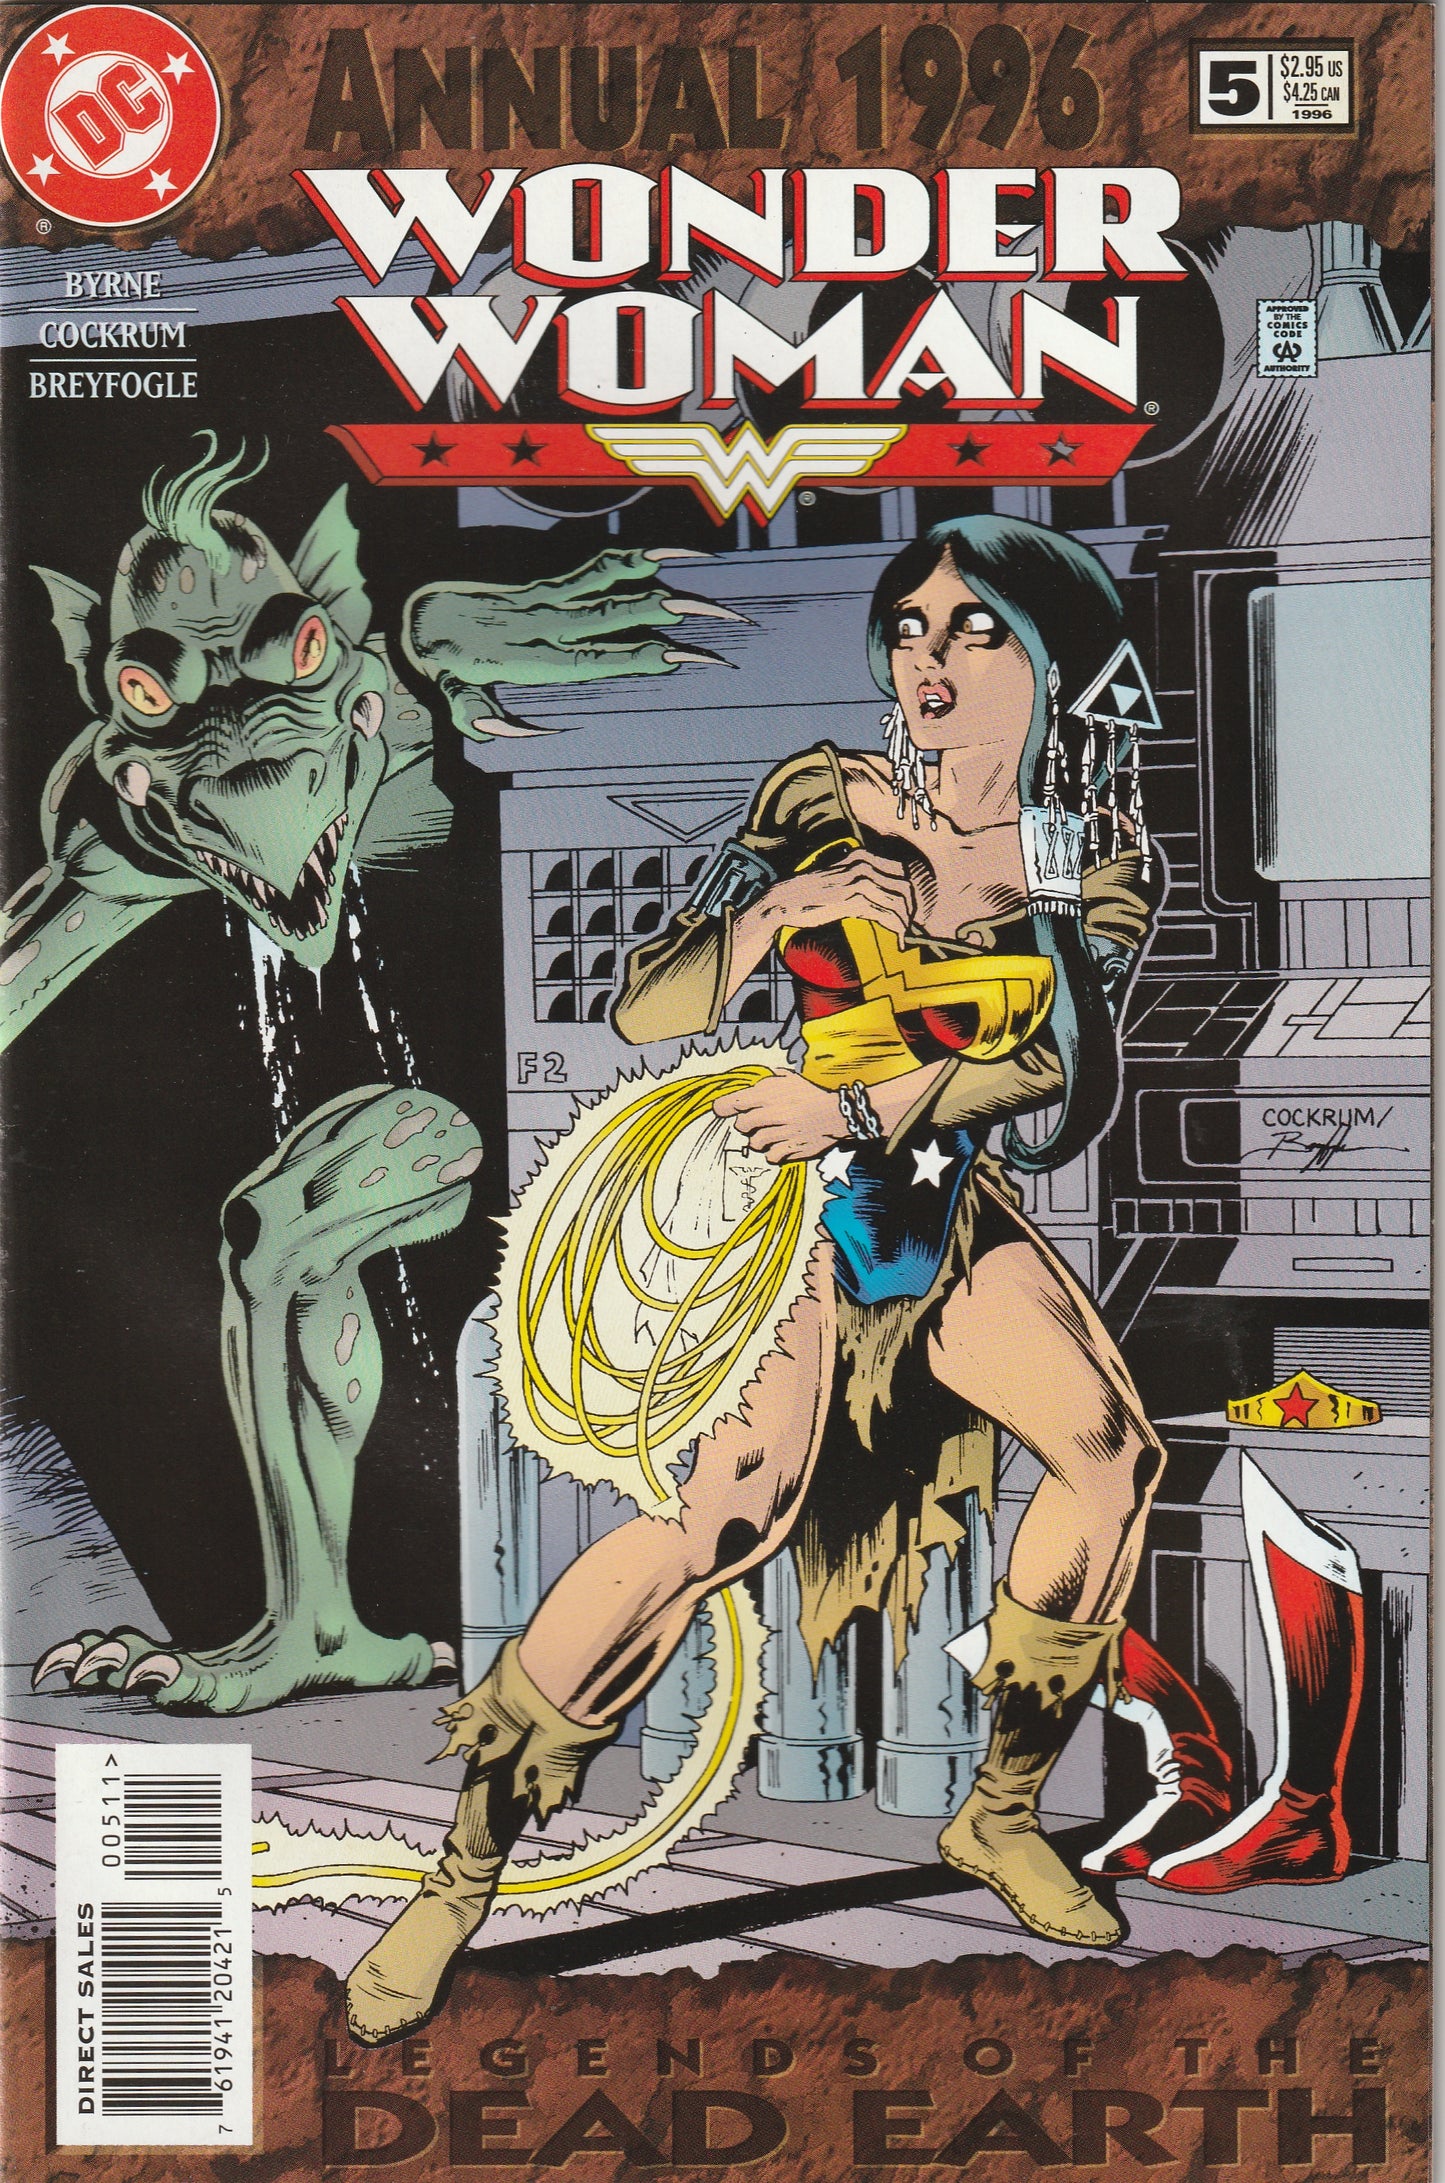 Wonder Woman Annual #5 (1996) - Legends of the Dead Earth